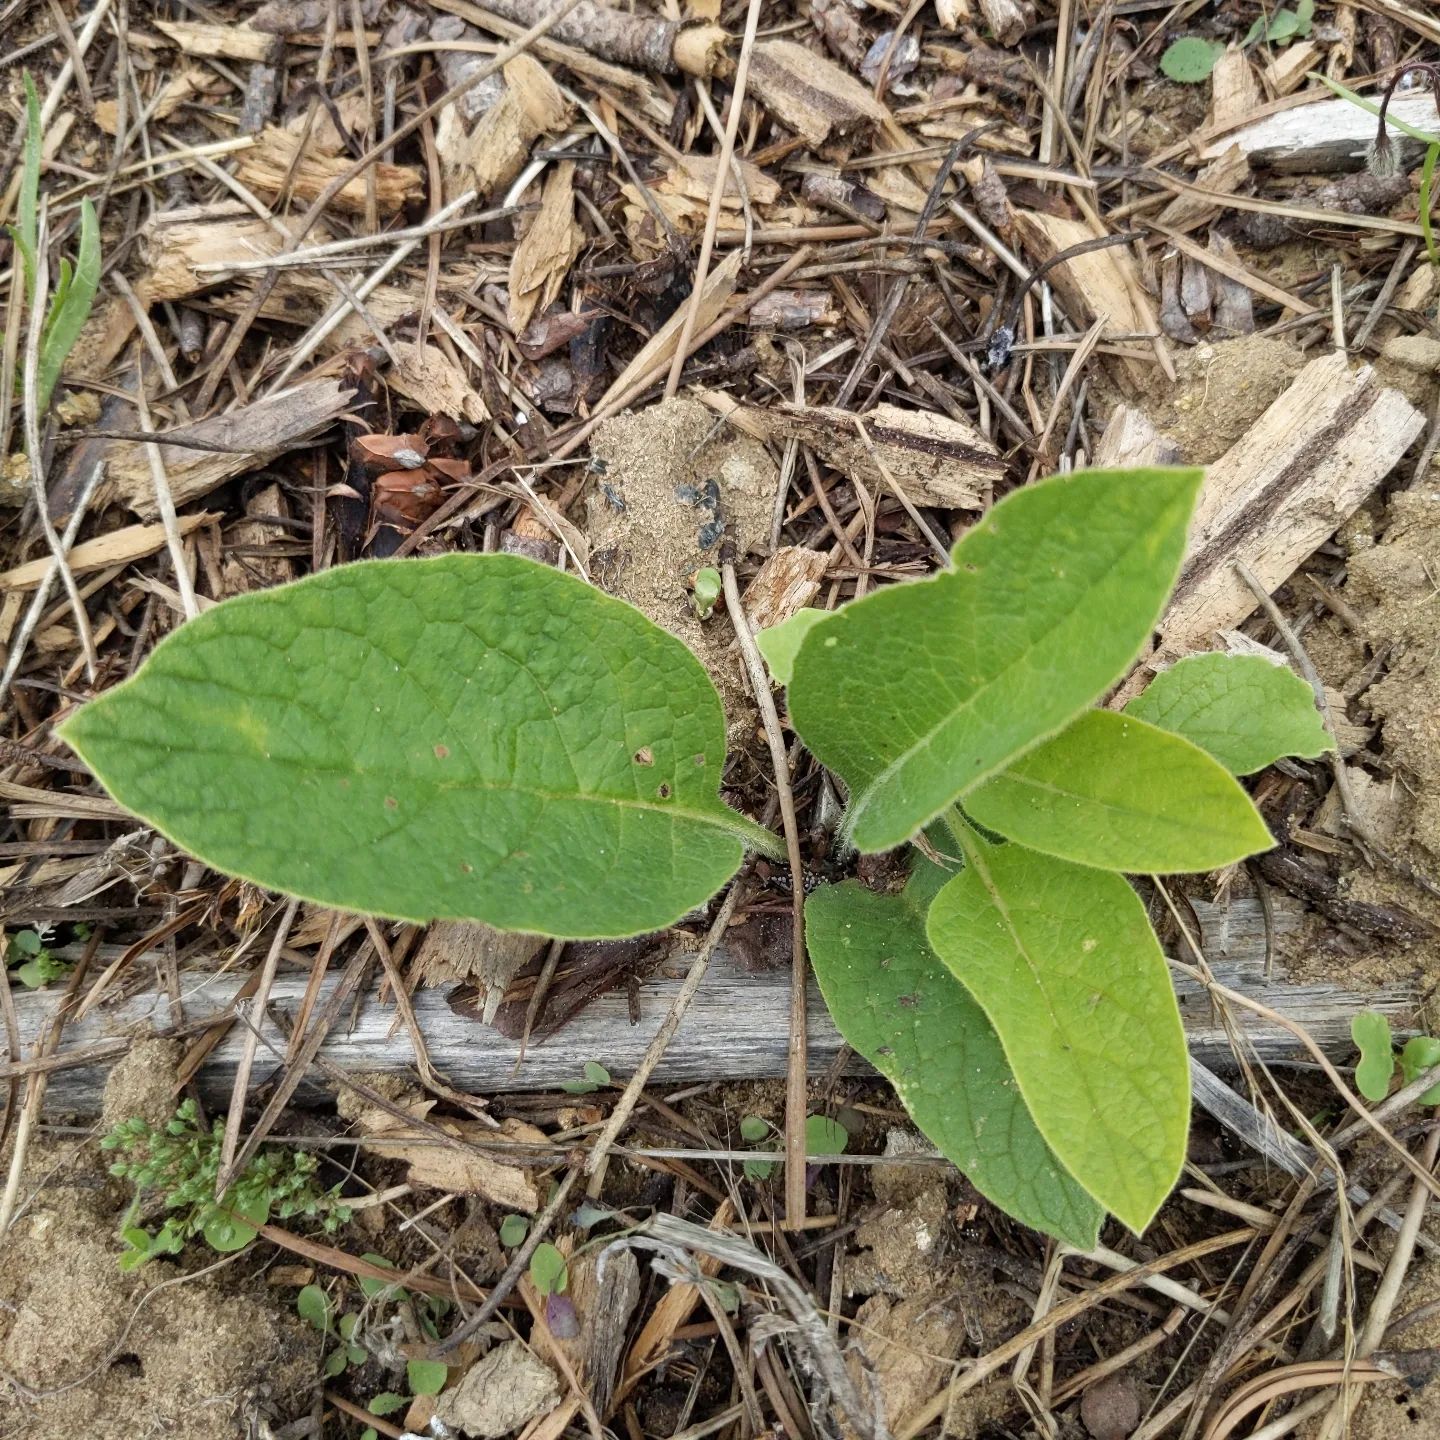 A #comfrey plant! We had planted a few but this is the first (only?) To grow so far